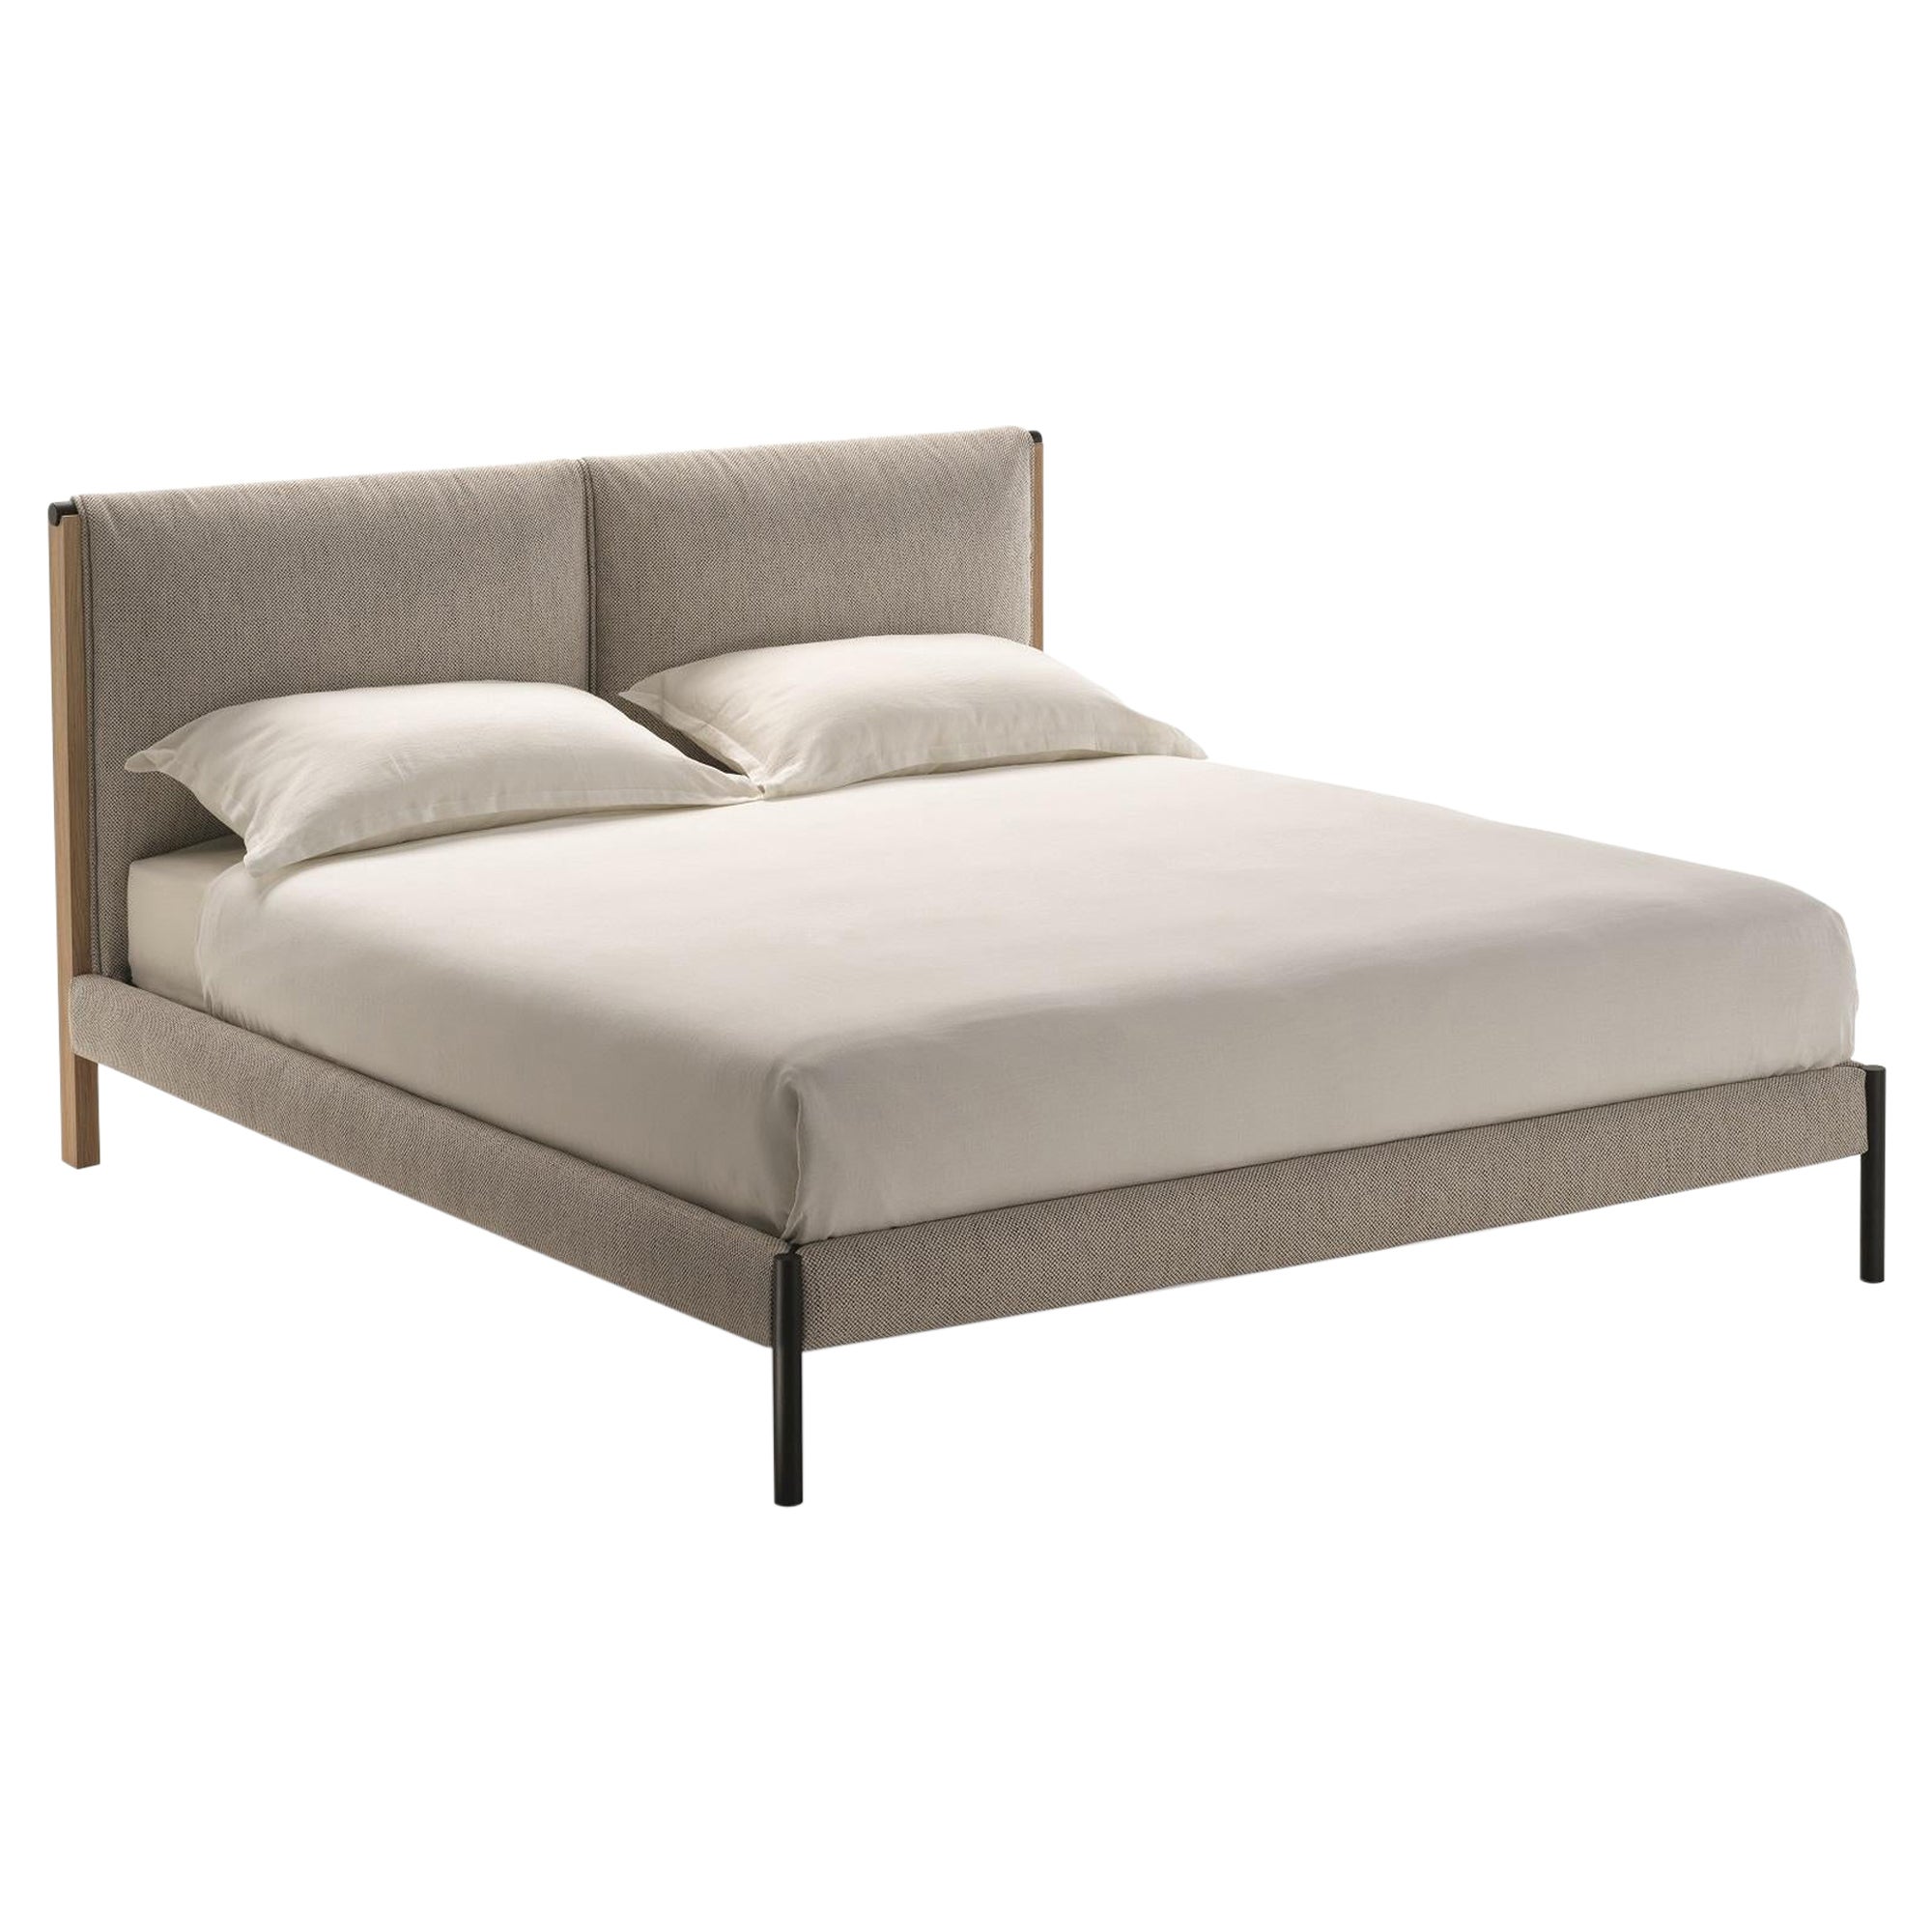 Zanotta Queen Size Ricordi Bed with Separate Springing in Toce Upholstery For Sale